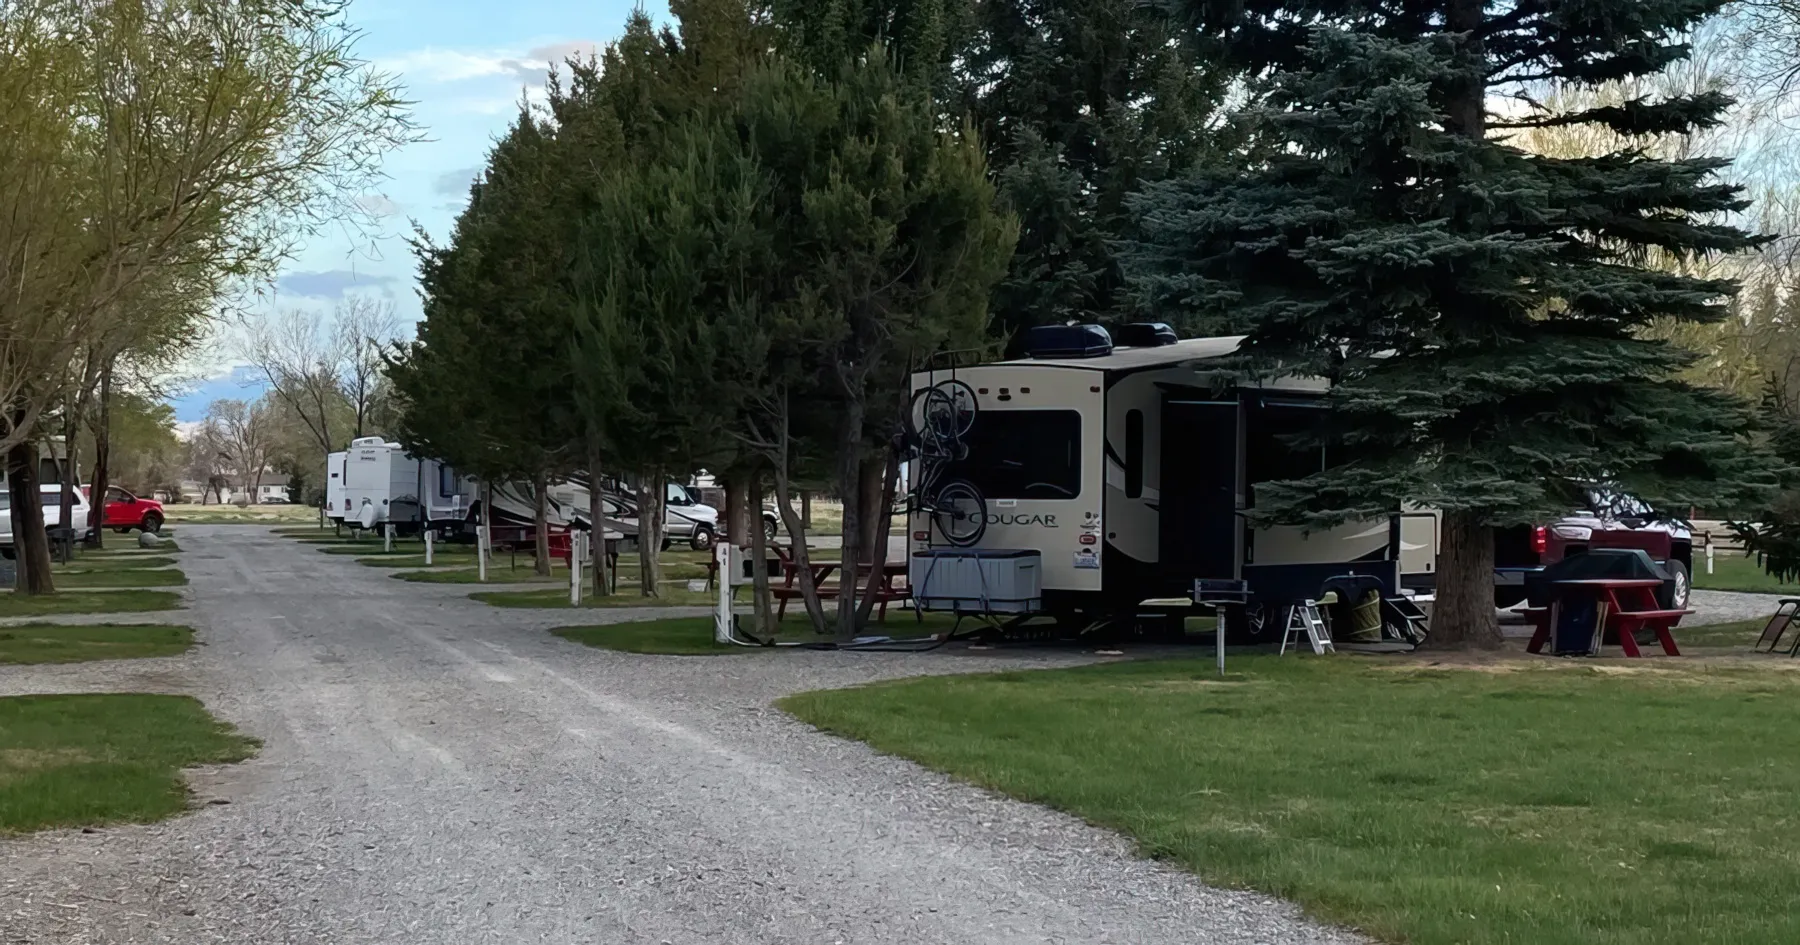 Mountain View RV Park and Restaurant